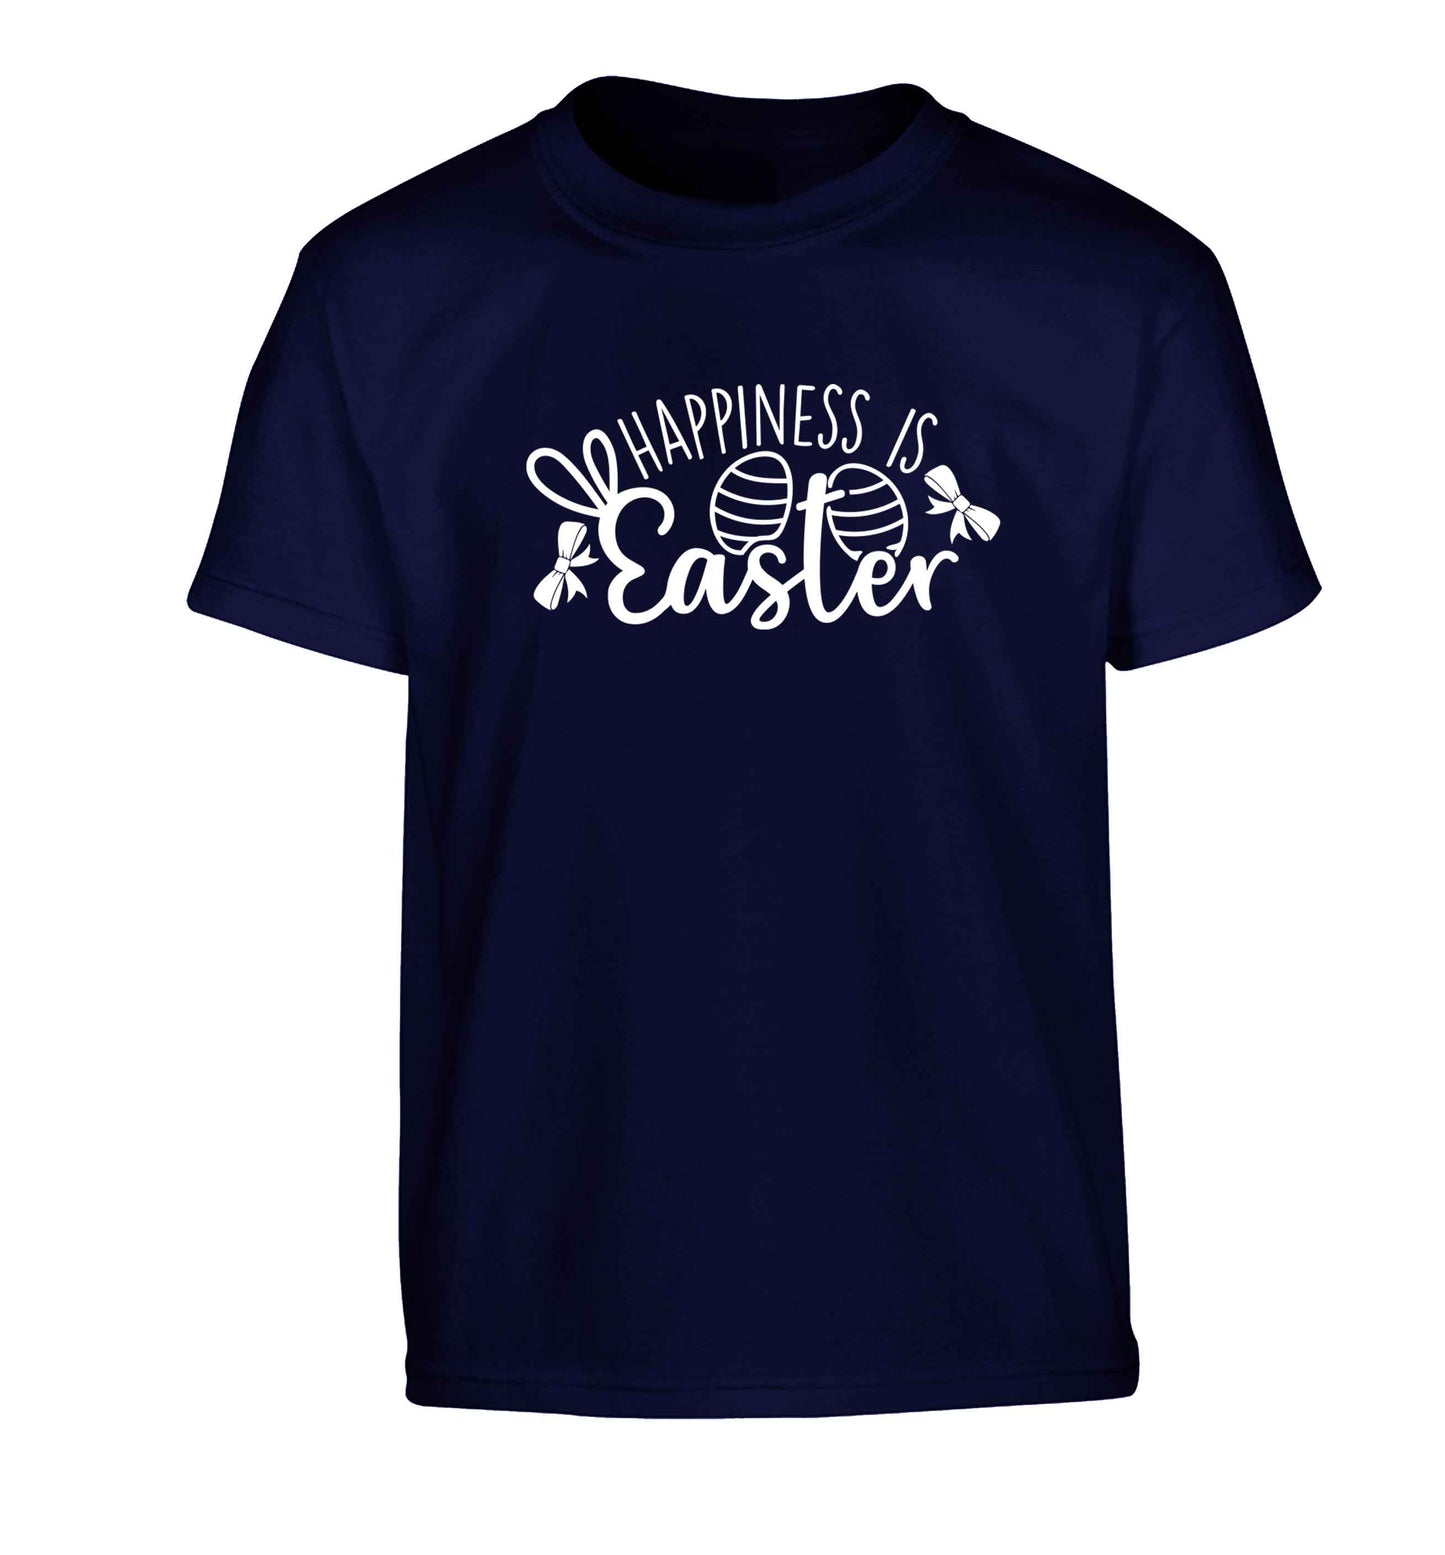 Happiness is easter Children's navy Tshirt 12-13 Years